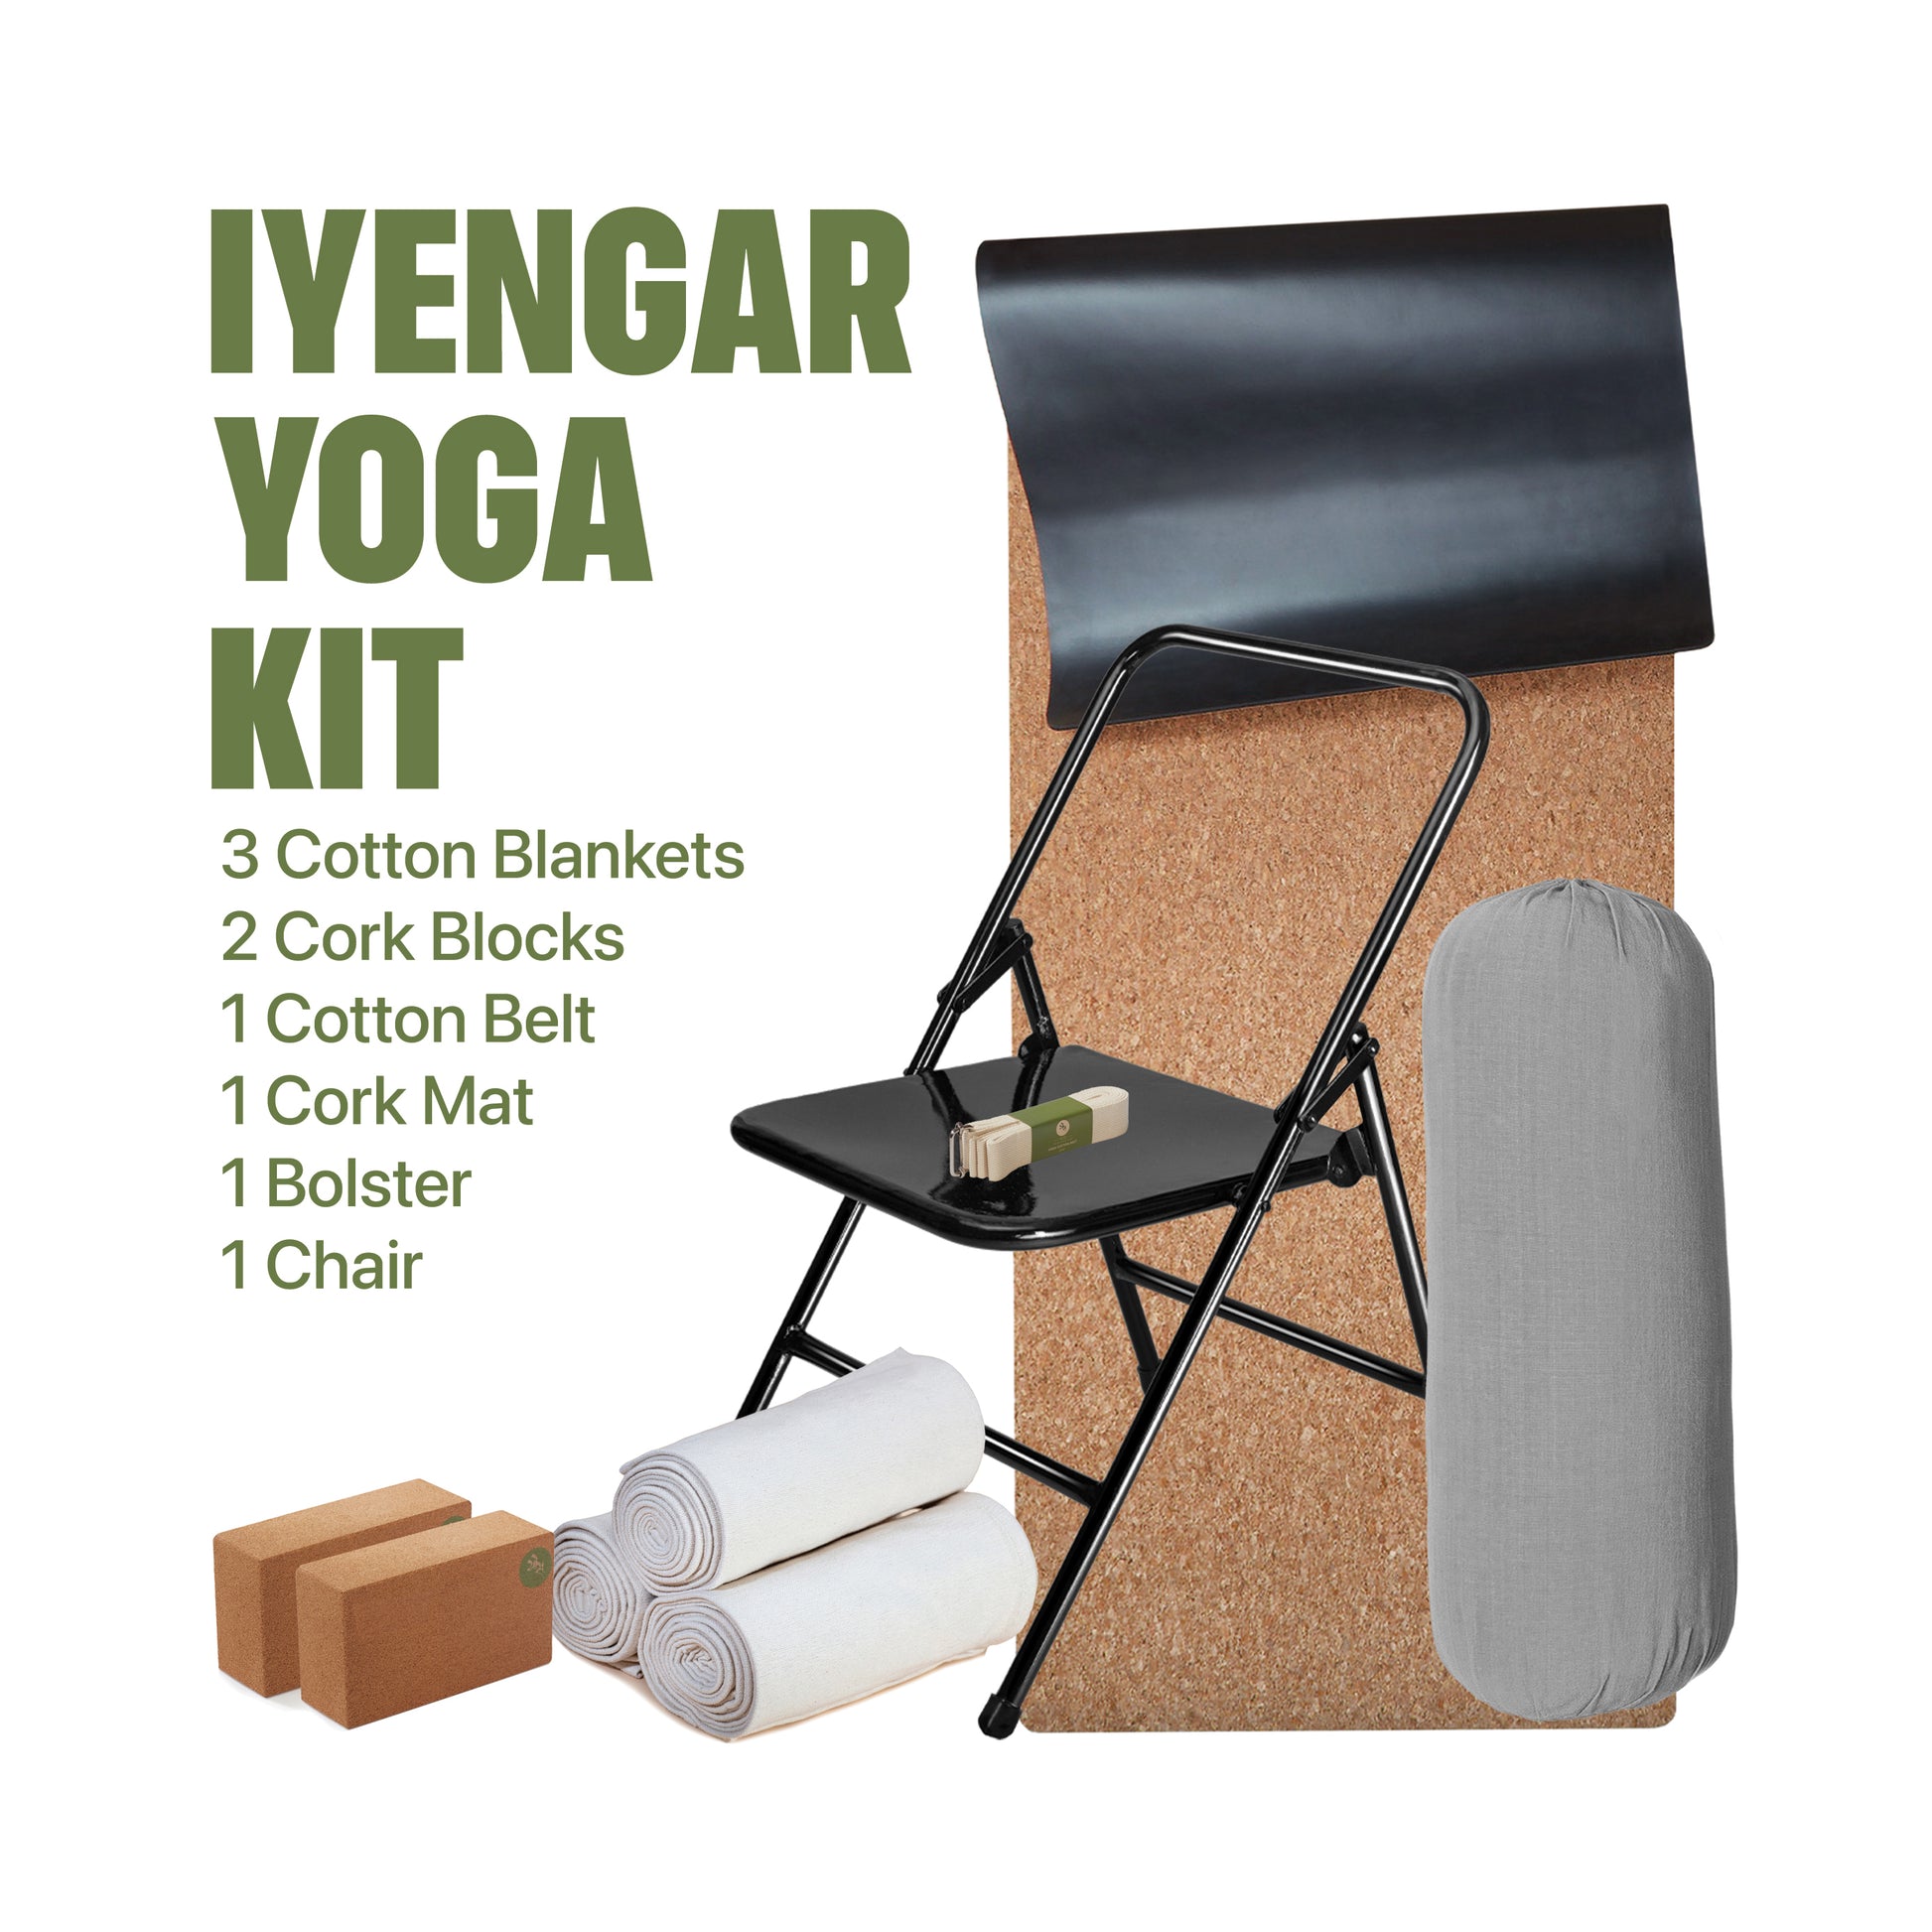 Yoga Props 101: A Buyer's Guide to Yoga Blocks, Bolsters, and More